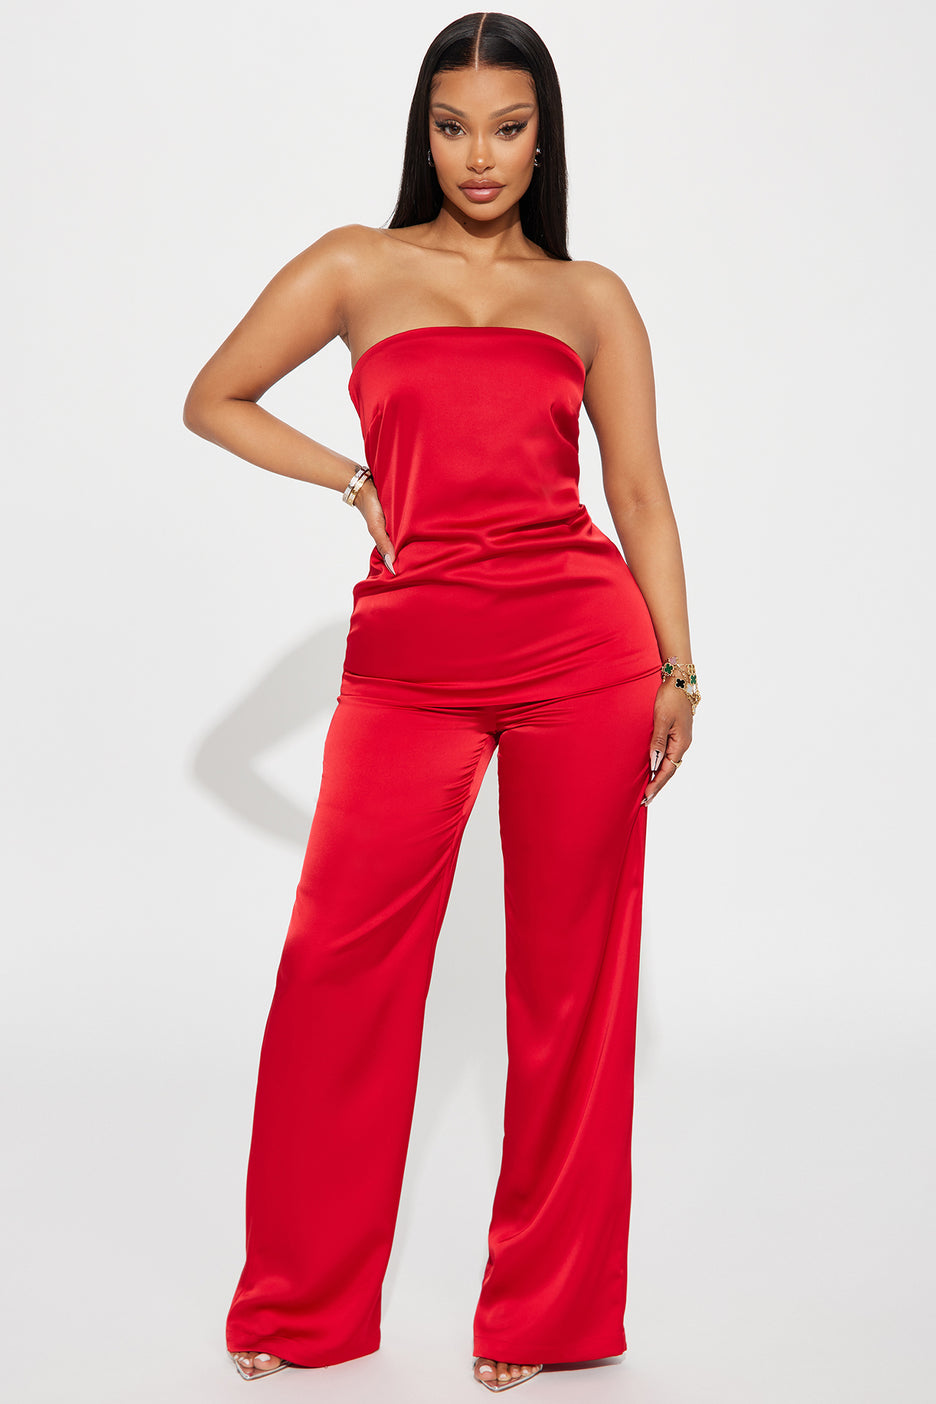 Our Top 10 Valentines Inspired Looks From Fashion Nova including Ruffle Tops Mini Dresses and Sexy Sleepwear 3